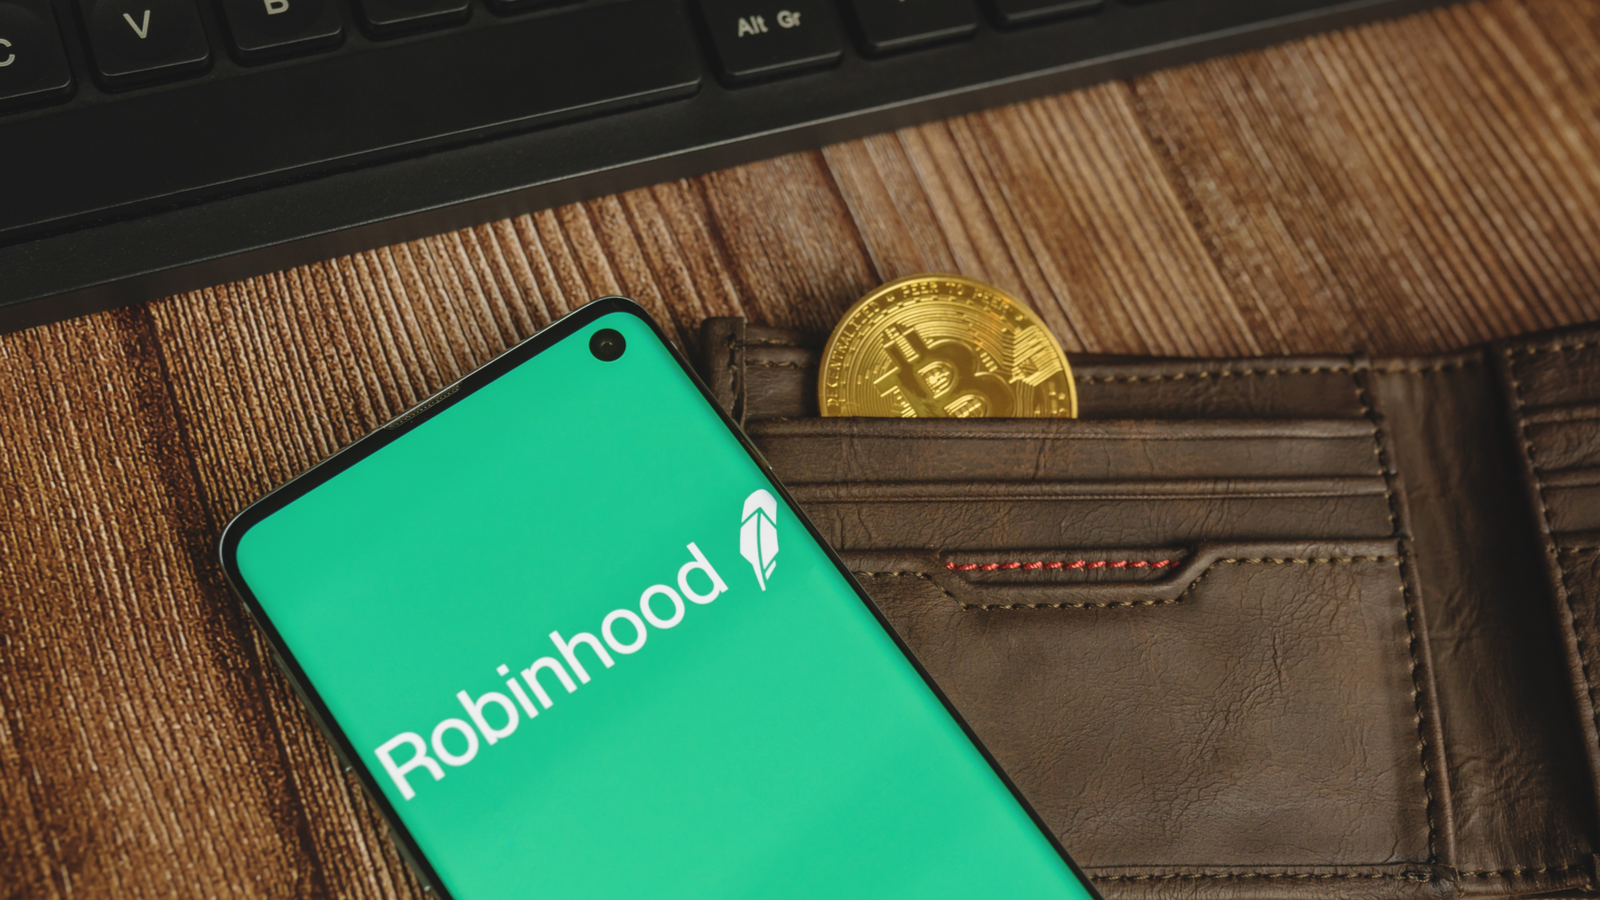 hood stock: An image of a wallet with a coin in it, a cellphone on top depicting Robinhood logo